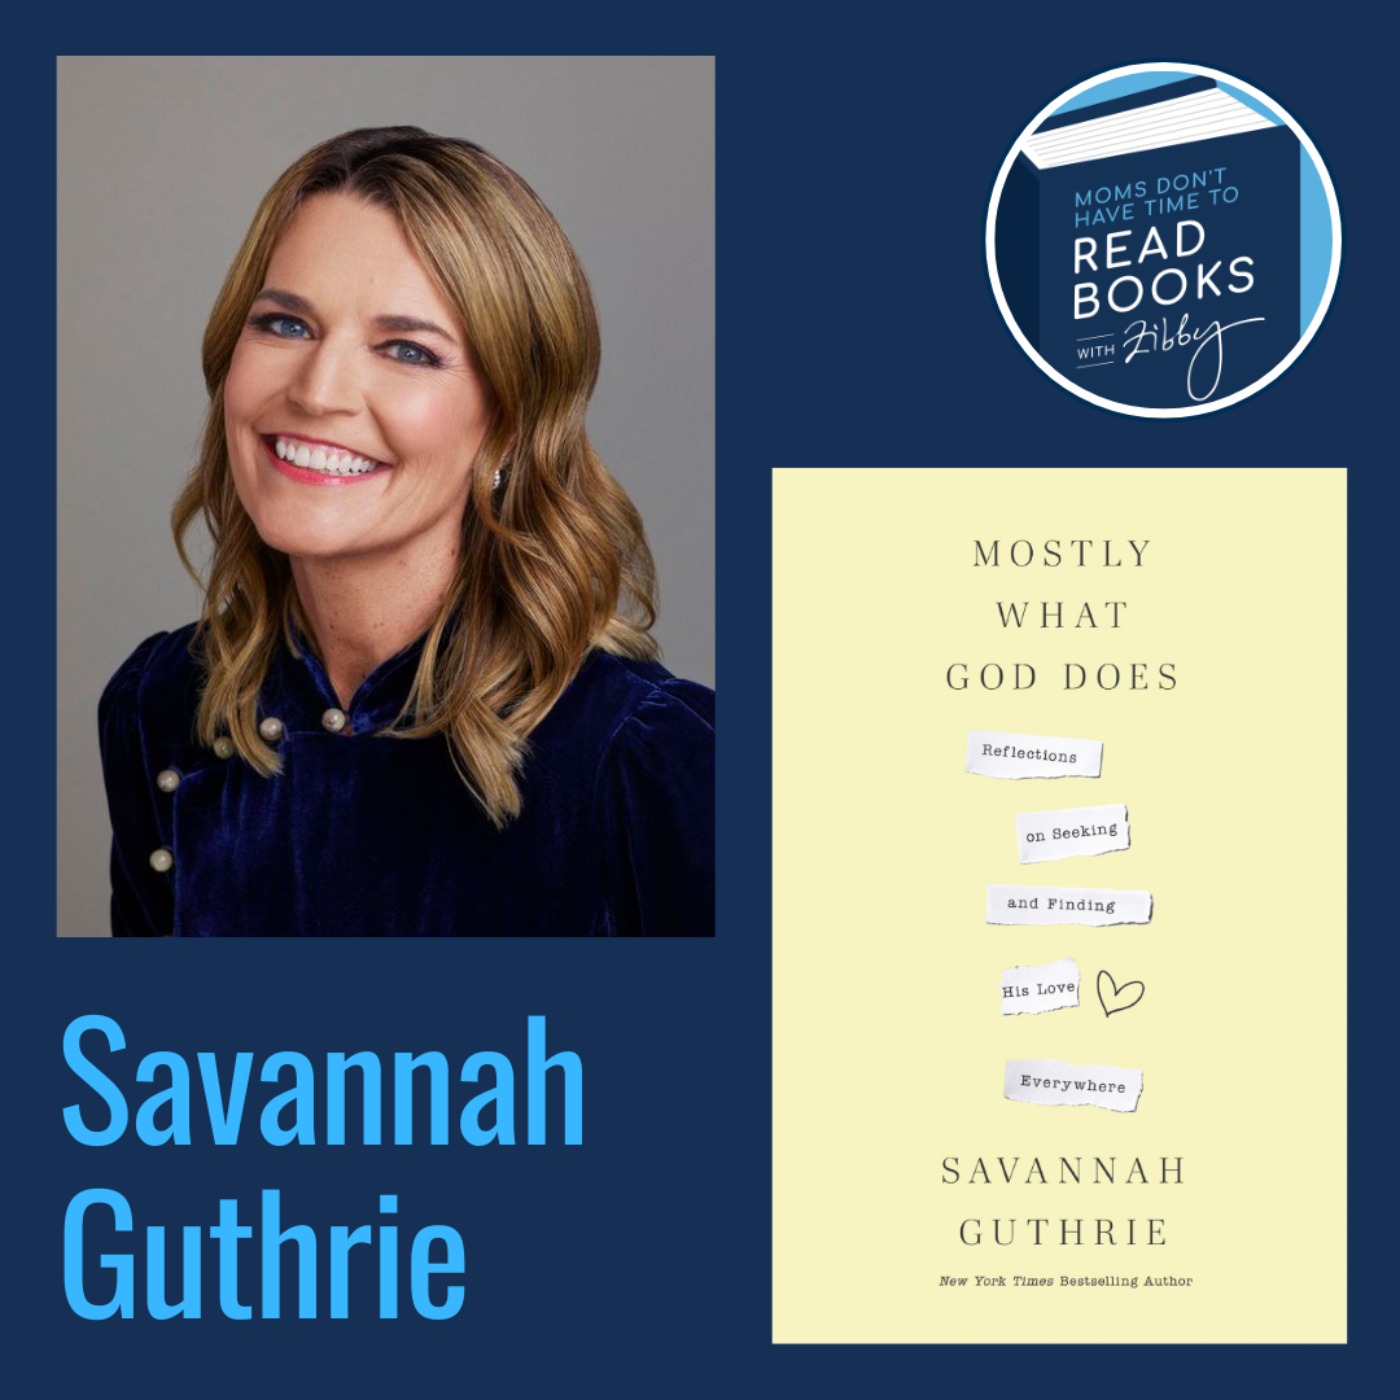 Savannah Guthrie, MOSTLY WHAT GOD DOES: Reflections on Seeking and Finding His Love Everywhere